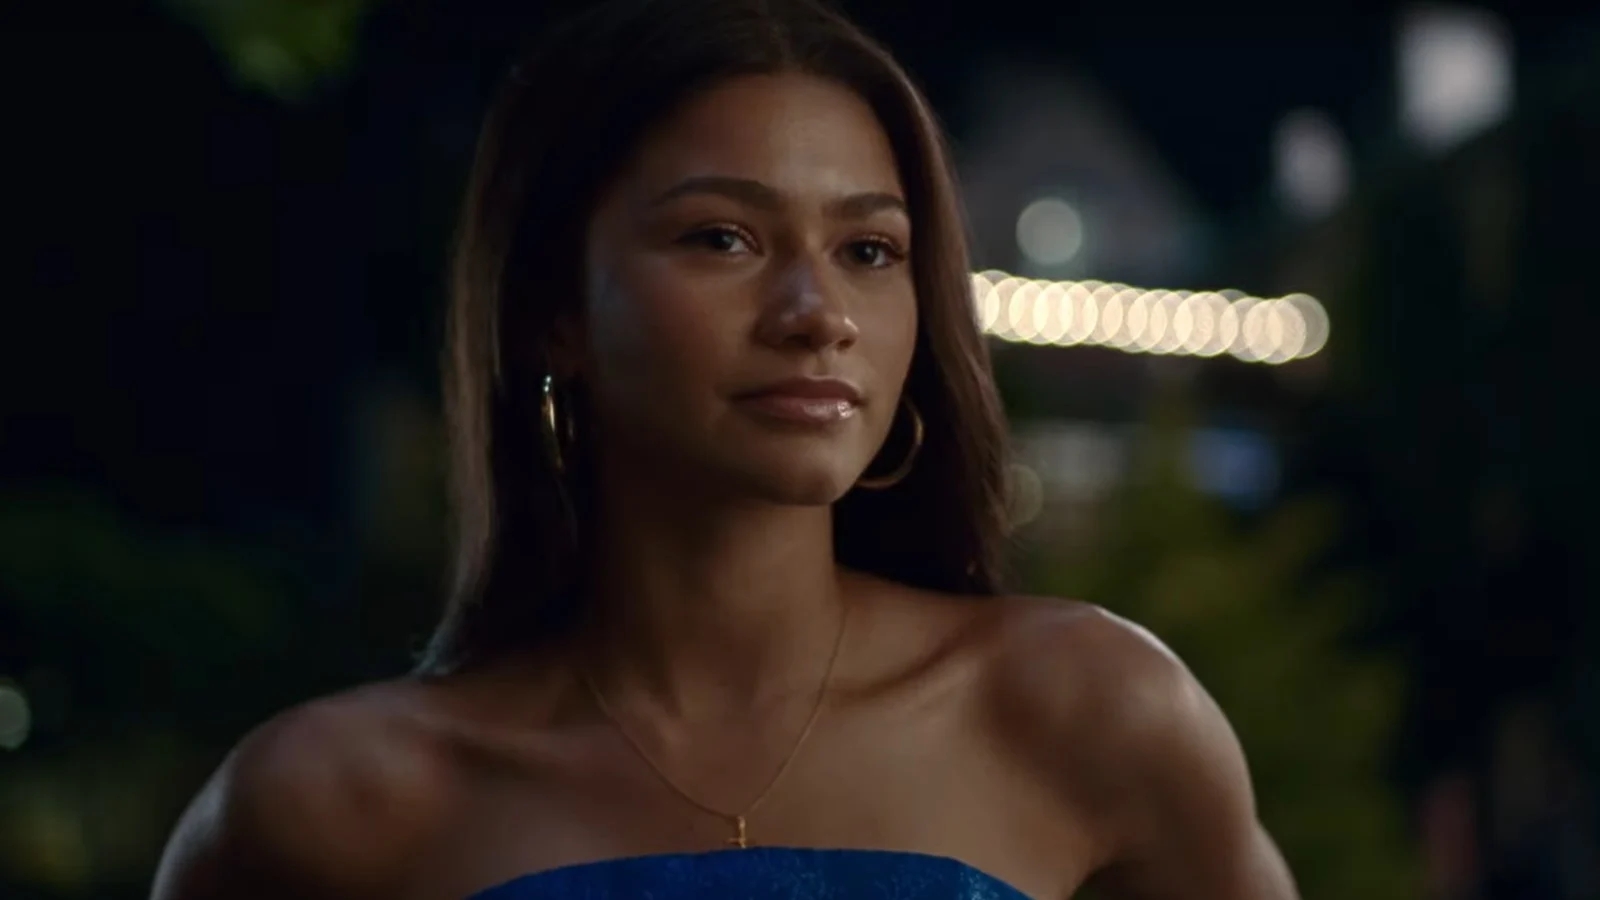 Challengers, Zendaya was afraid to play tennis in front of the cameras